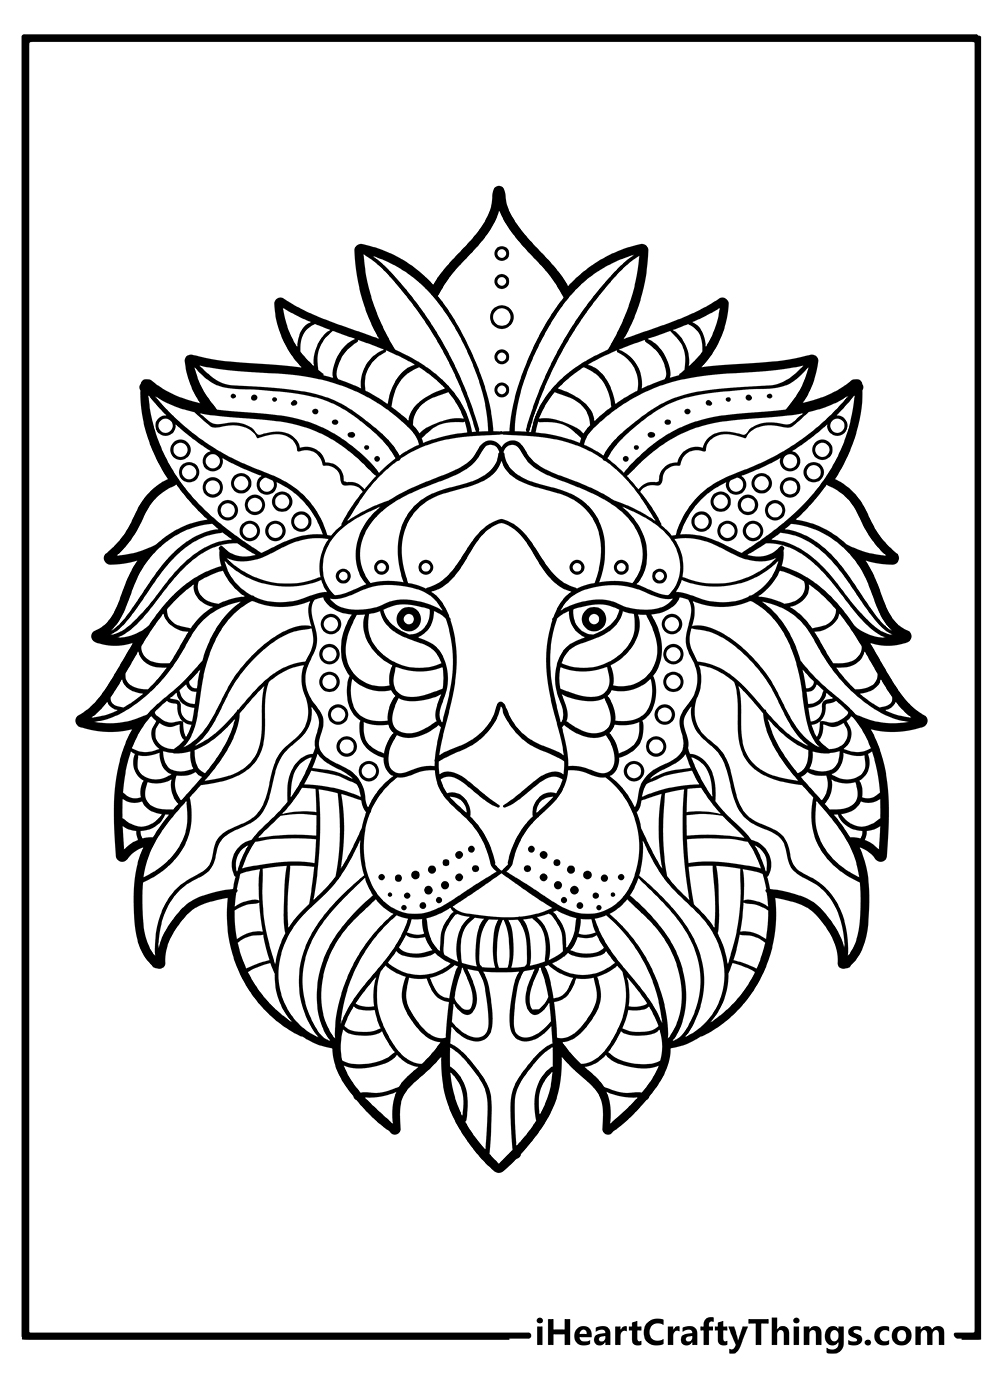 Animal coloring pages free printables